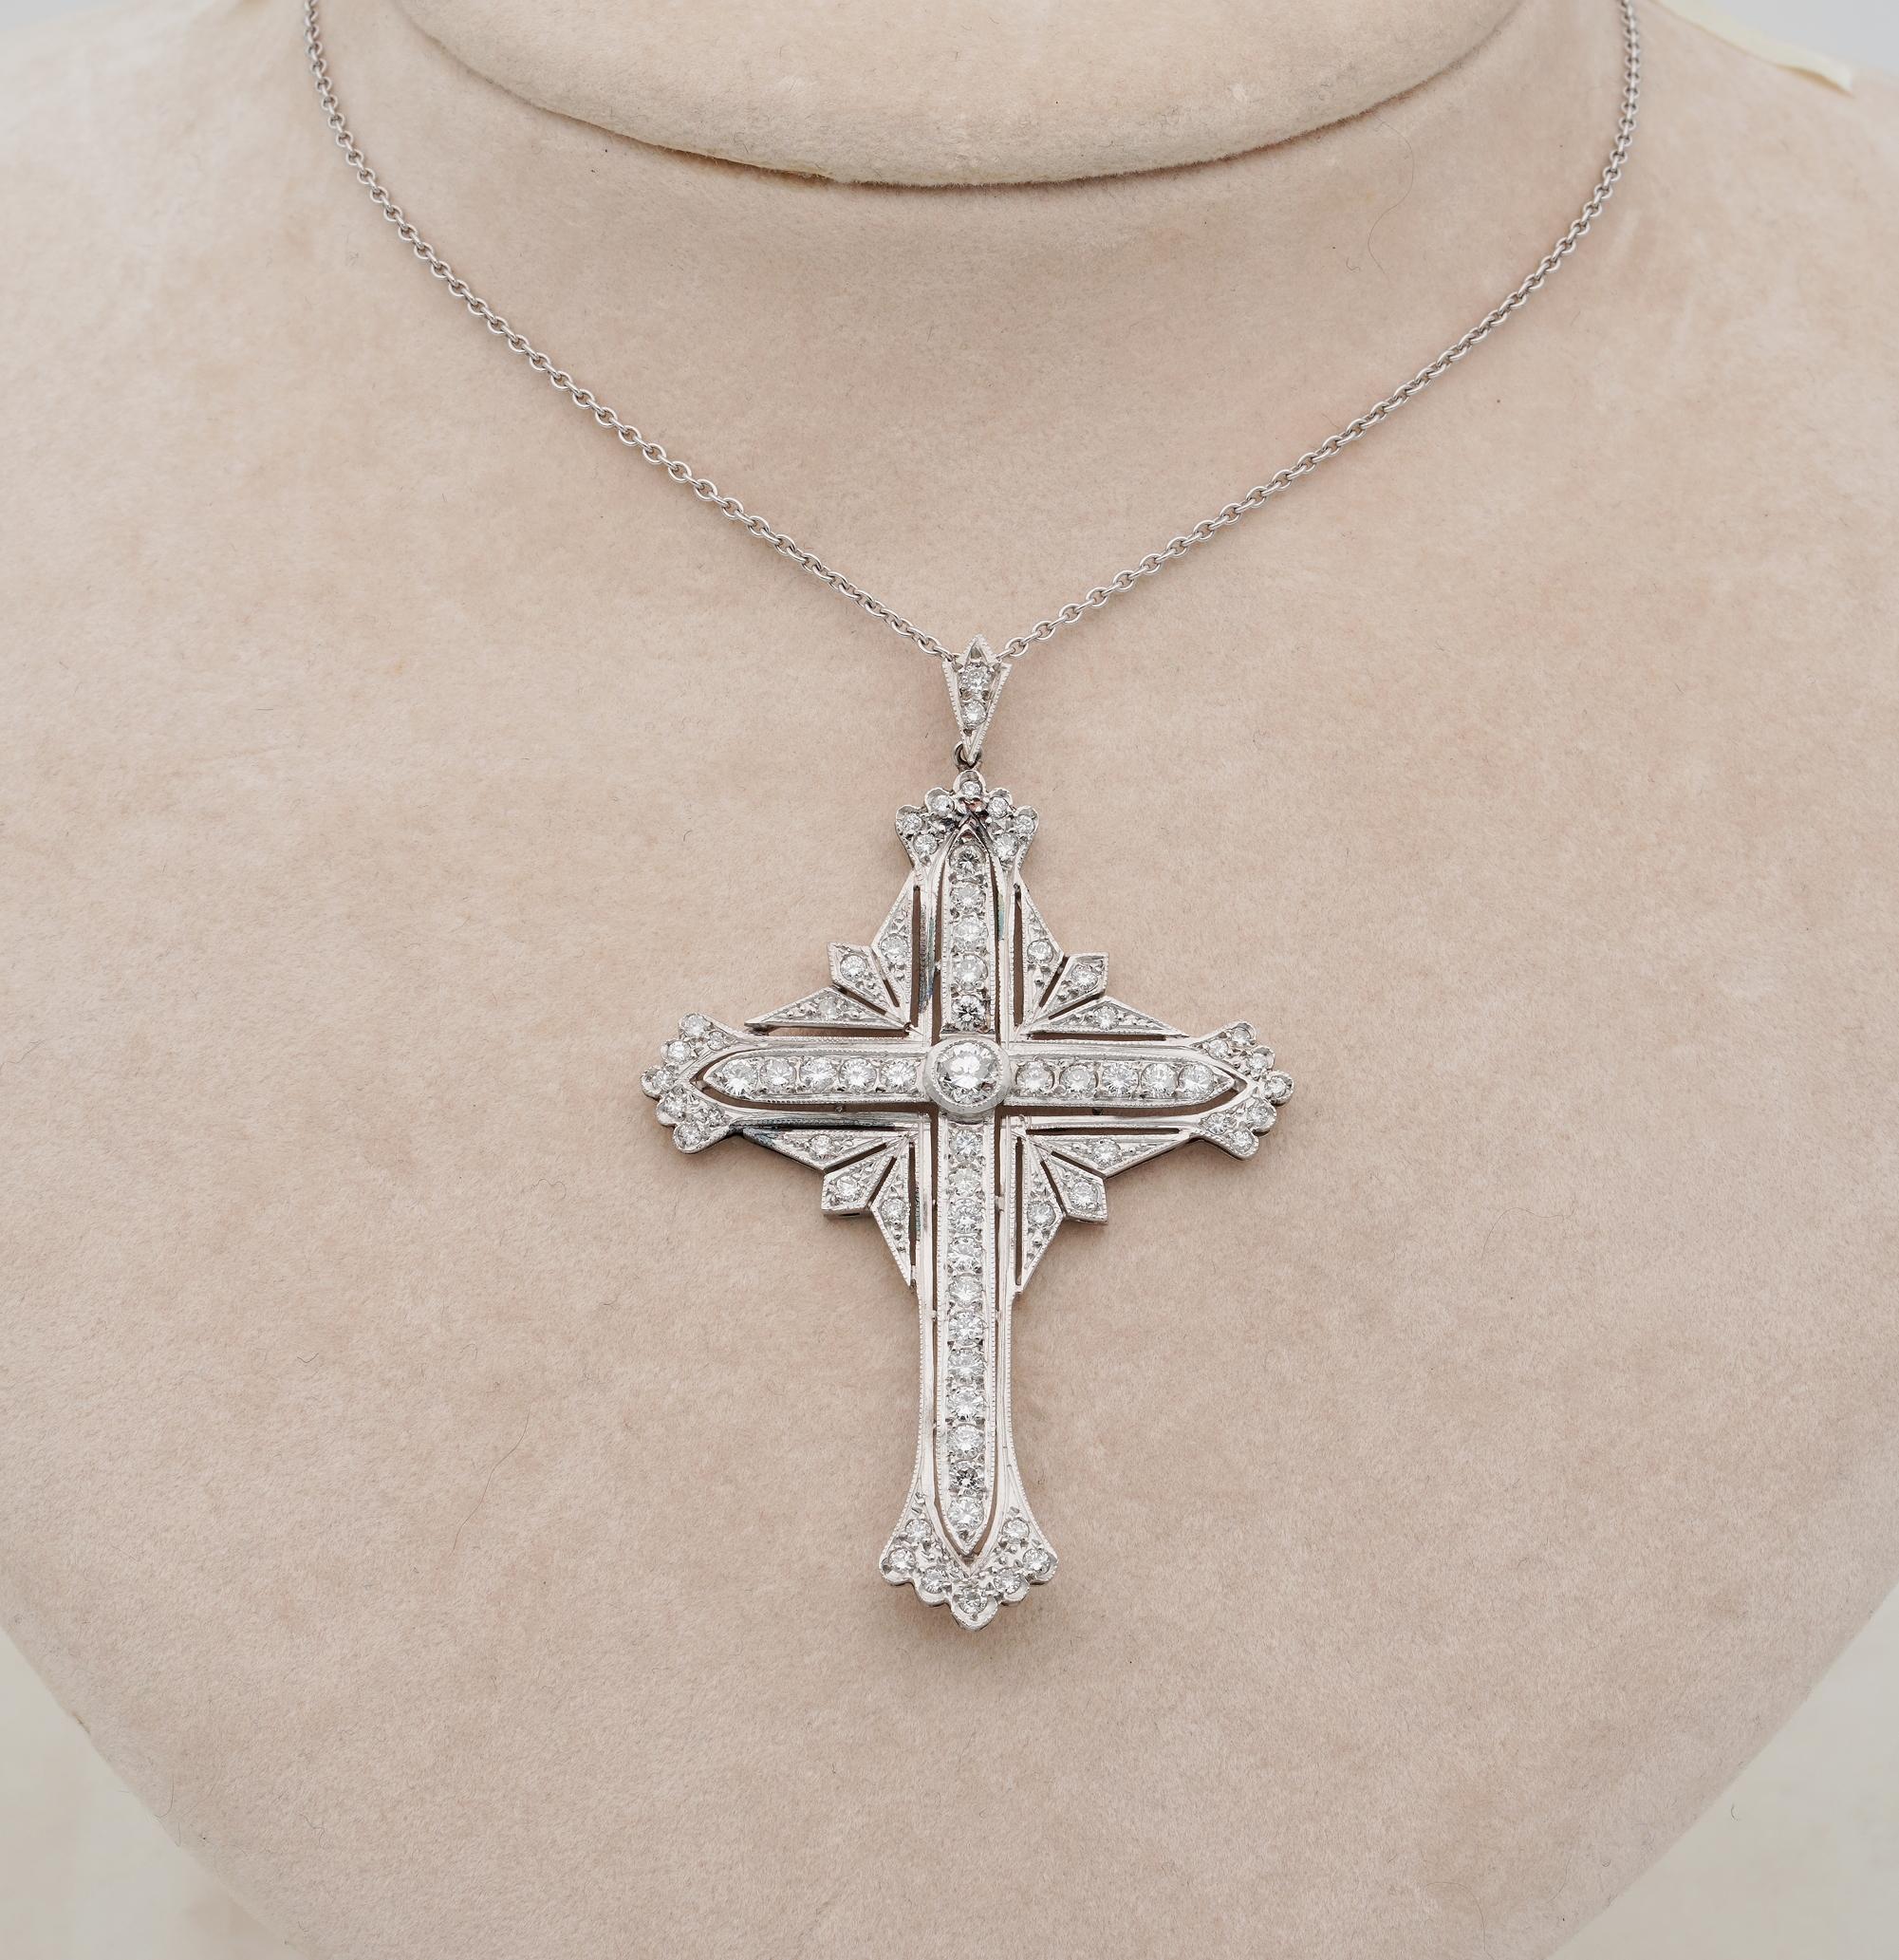 Marvellous Art Deco Diamond cross, hand created by a master workmanship of solid Platinum, 1920 ca.
Suitable for either sex
Large and amazing art work beautifully detailed by carving and Diamonds
Superb Diamond set of 2.15 Ct
Large in size being 63